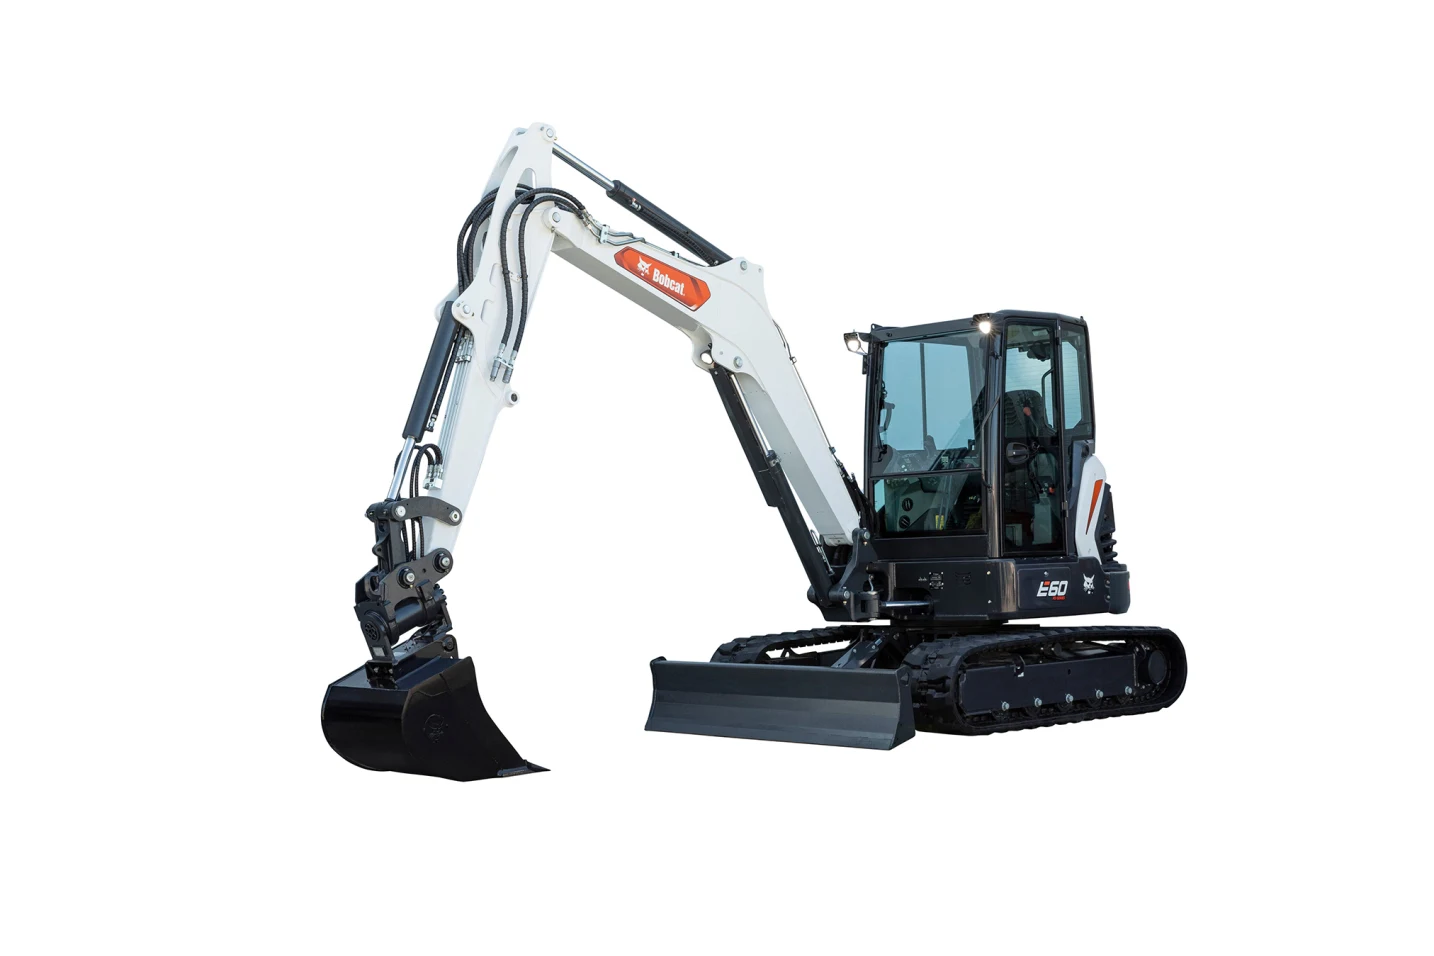 Browse Specs and more for the E60 Compact Excavator - Bobcat of the Rockies